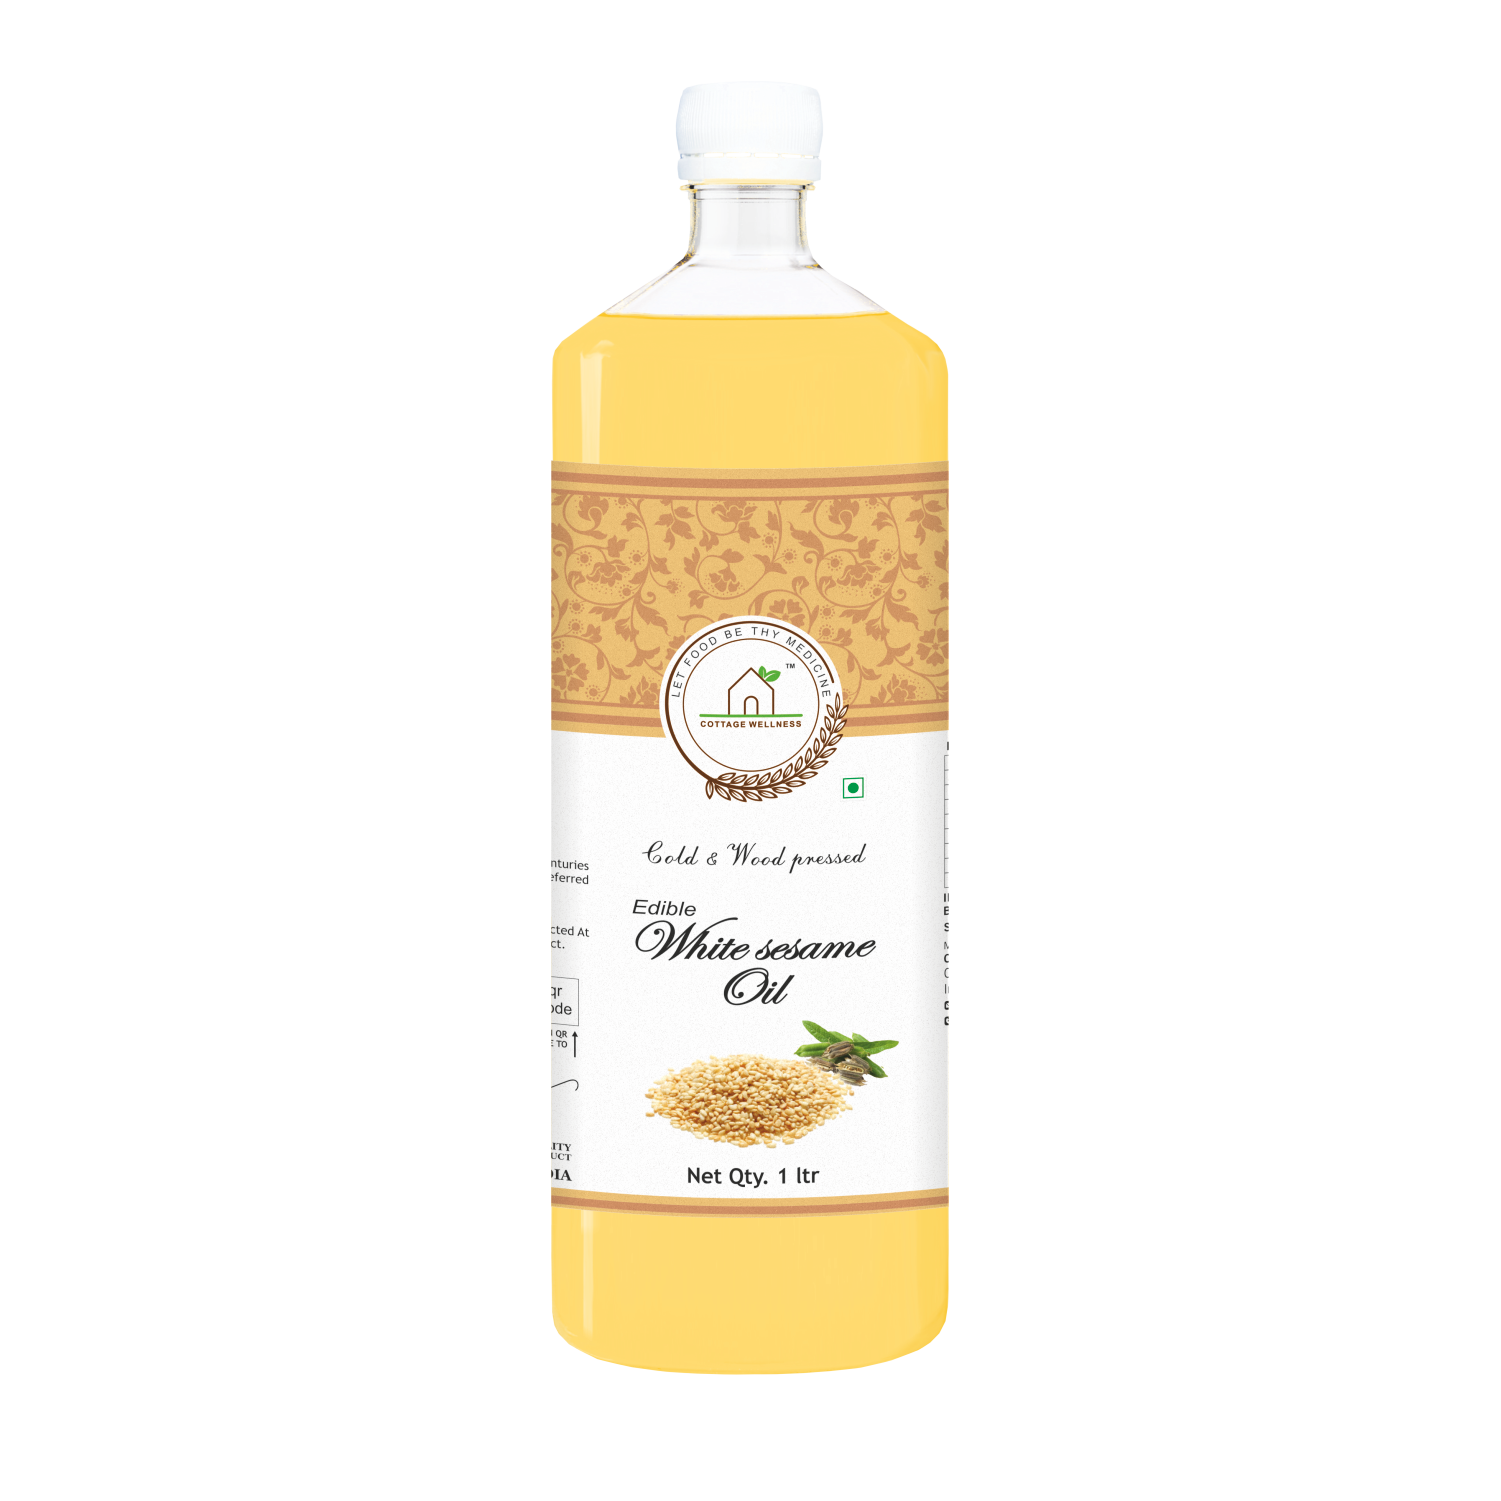 Cottage Wellness White Sesame Oil Cold and Wood Pressed Edible 1Litre - hfnl!fe